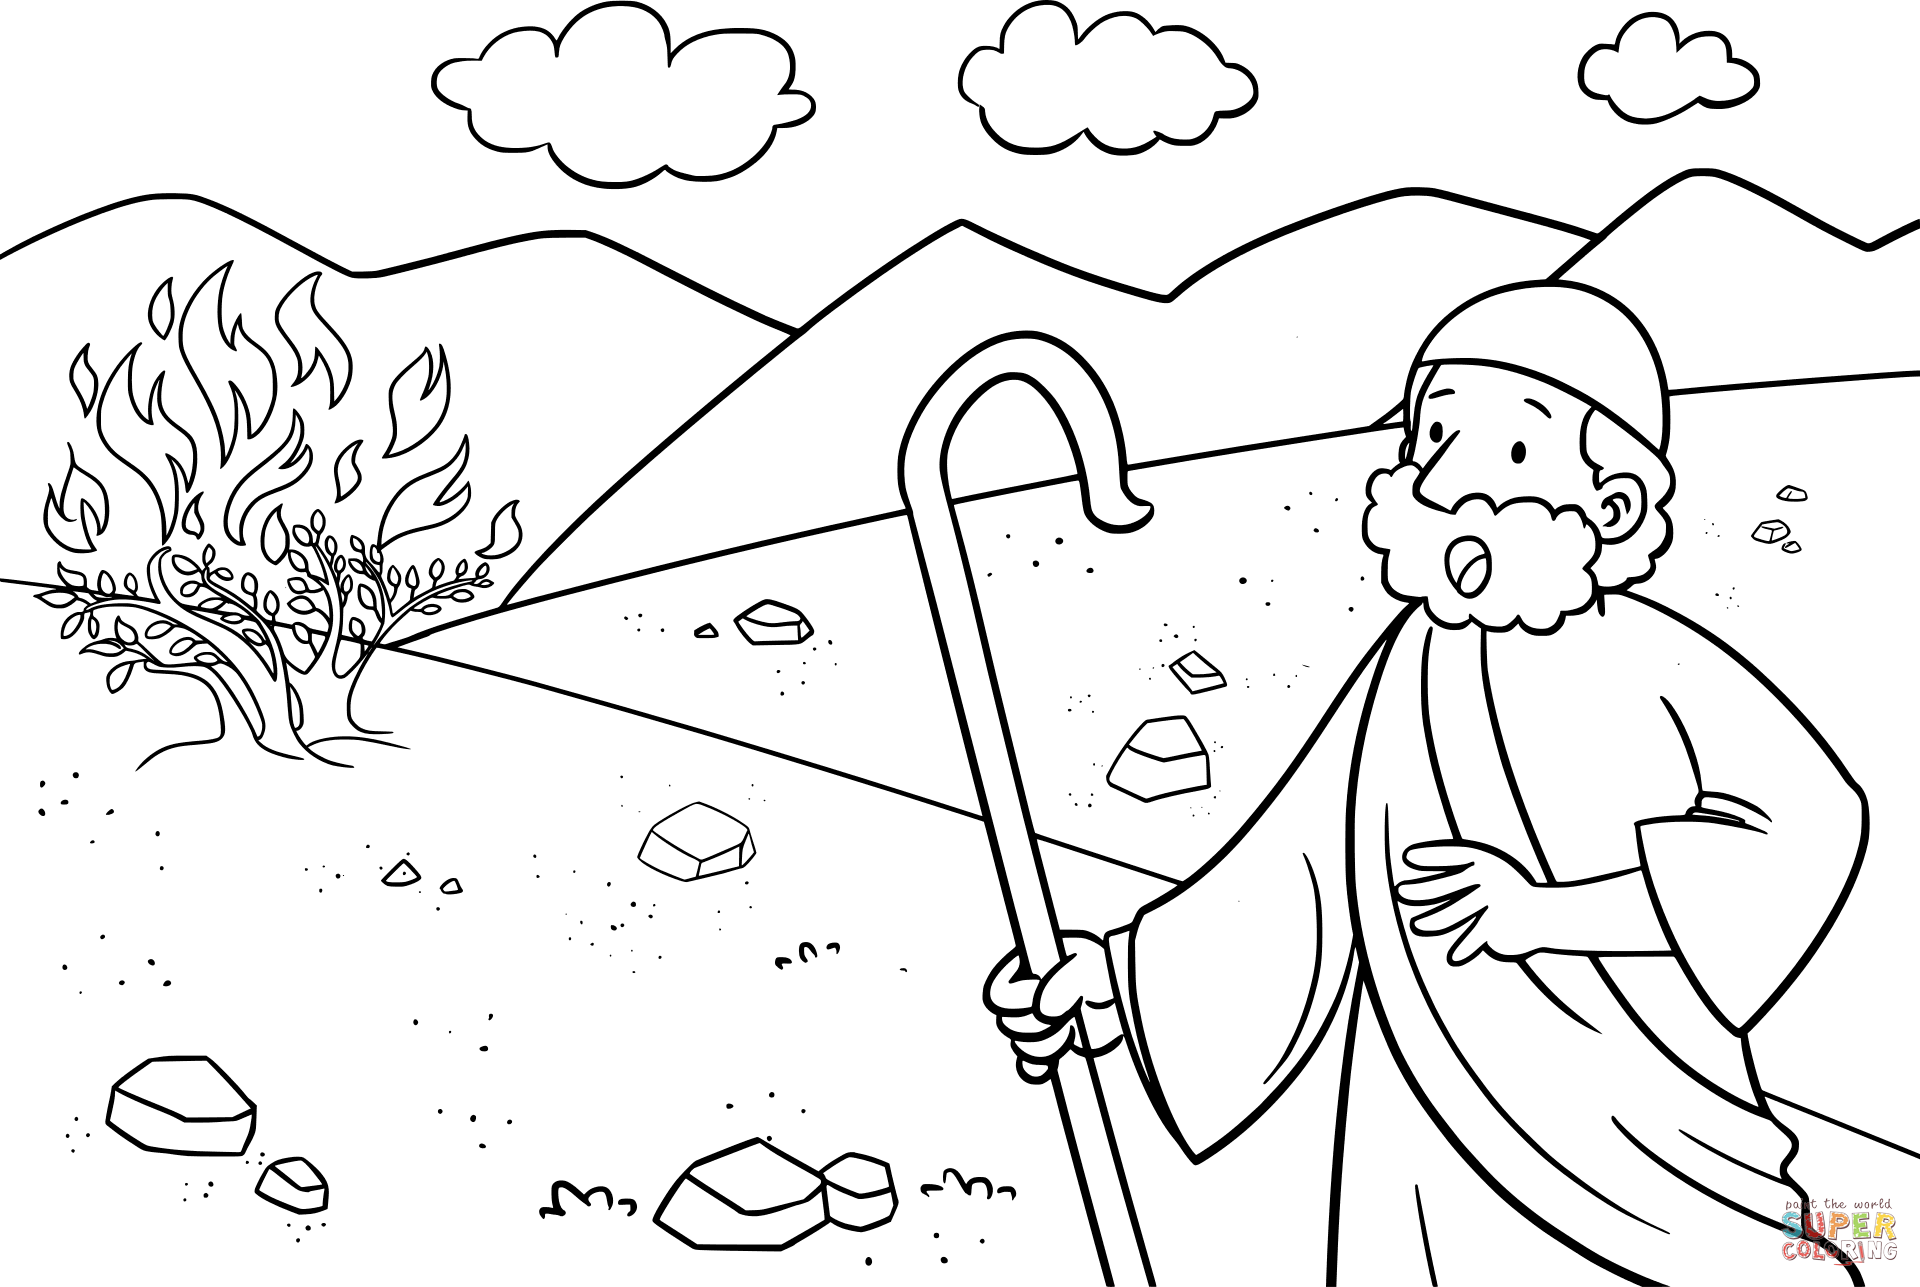 Moses the burning.